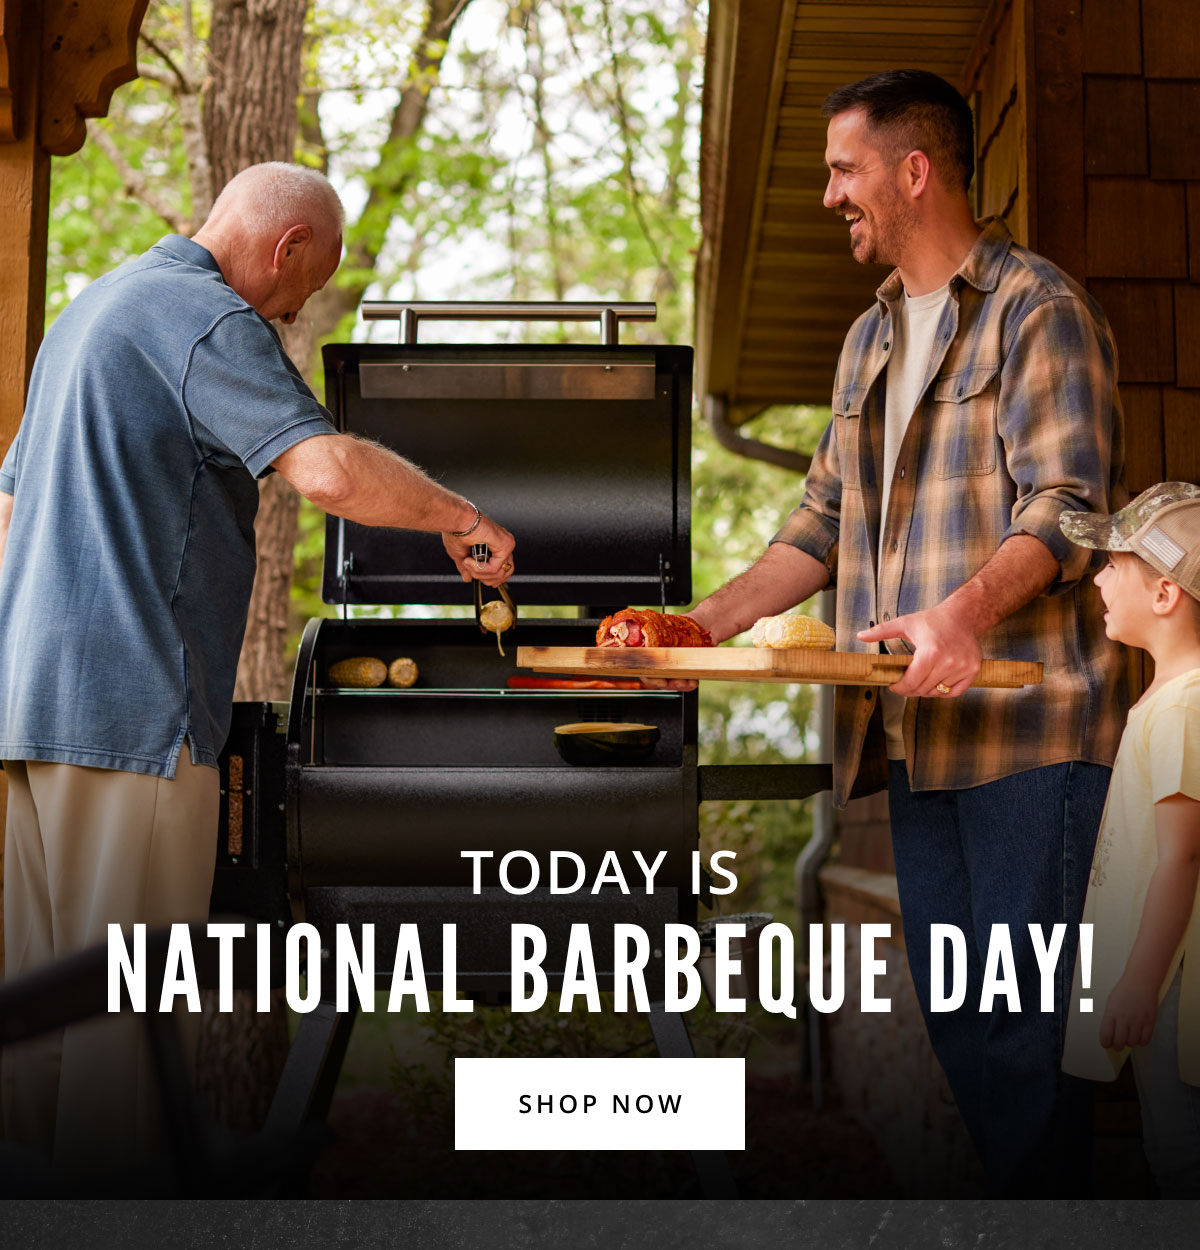 National BBQ Day